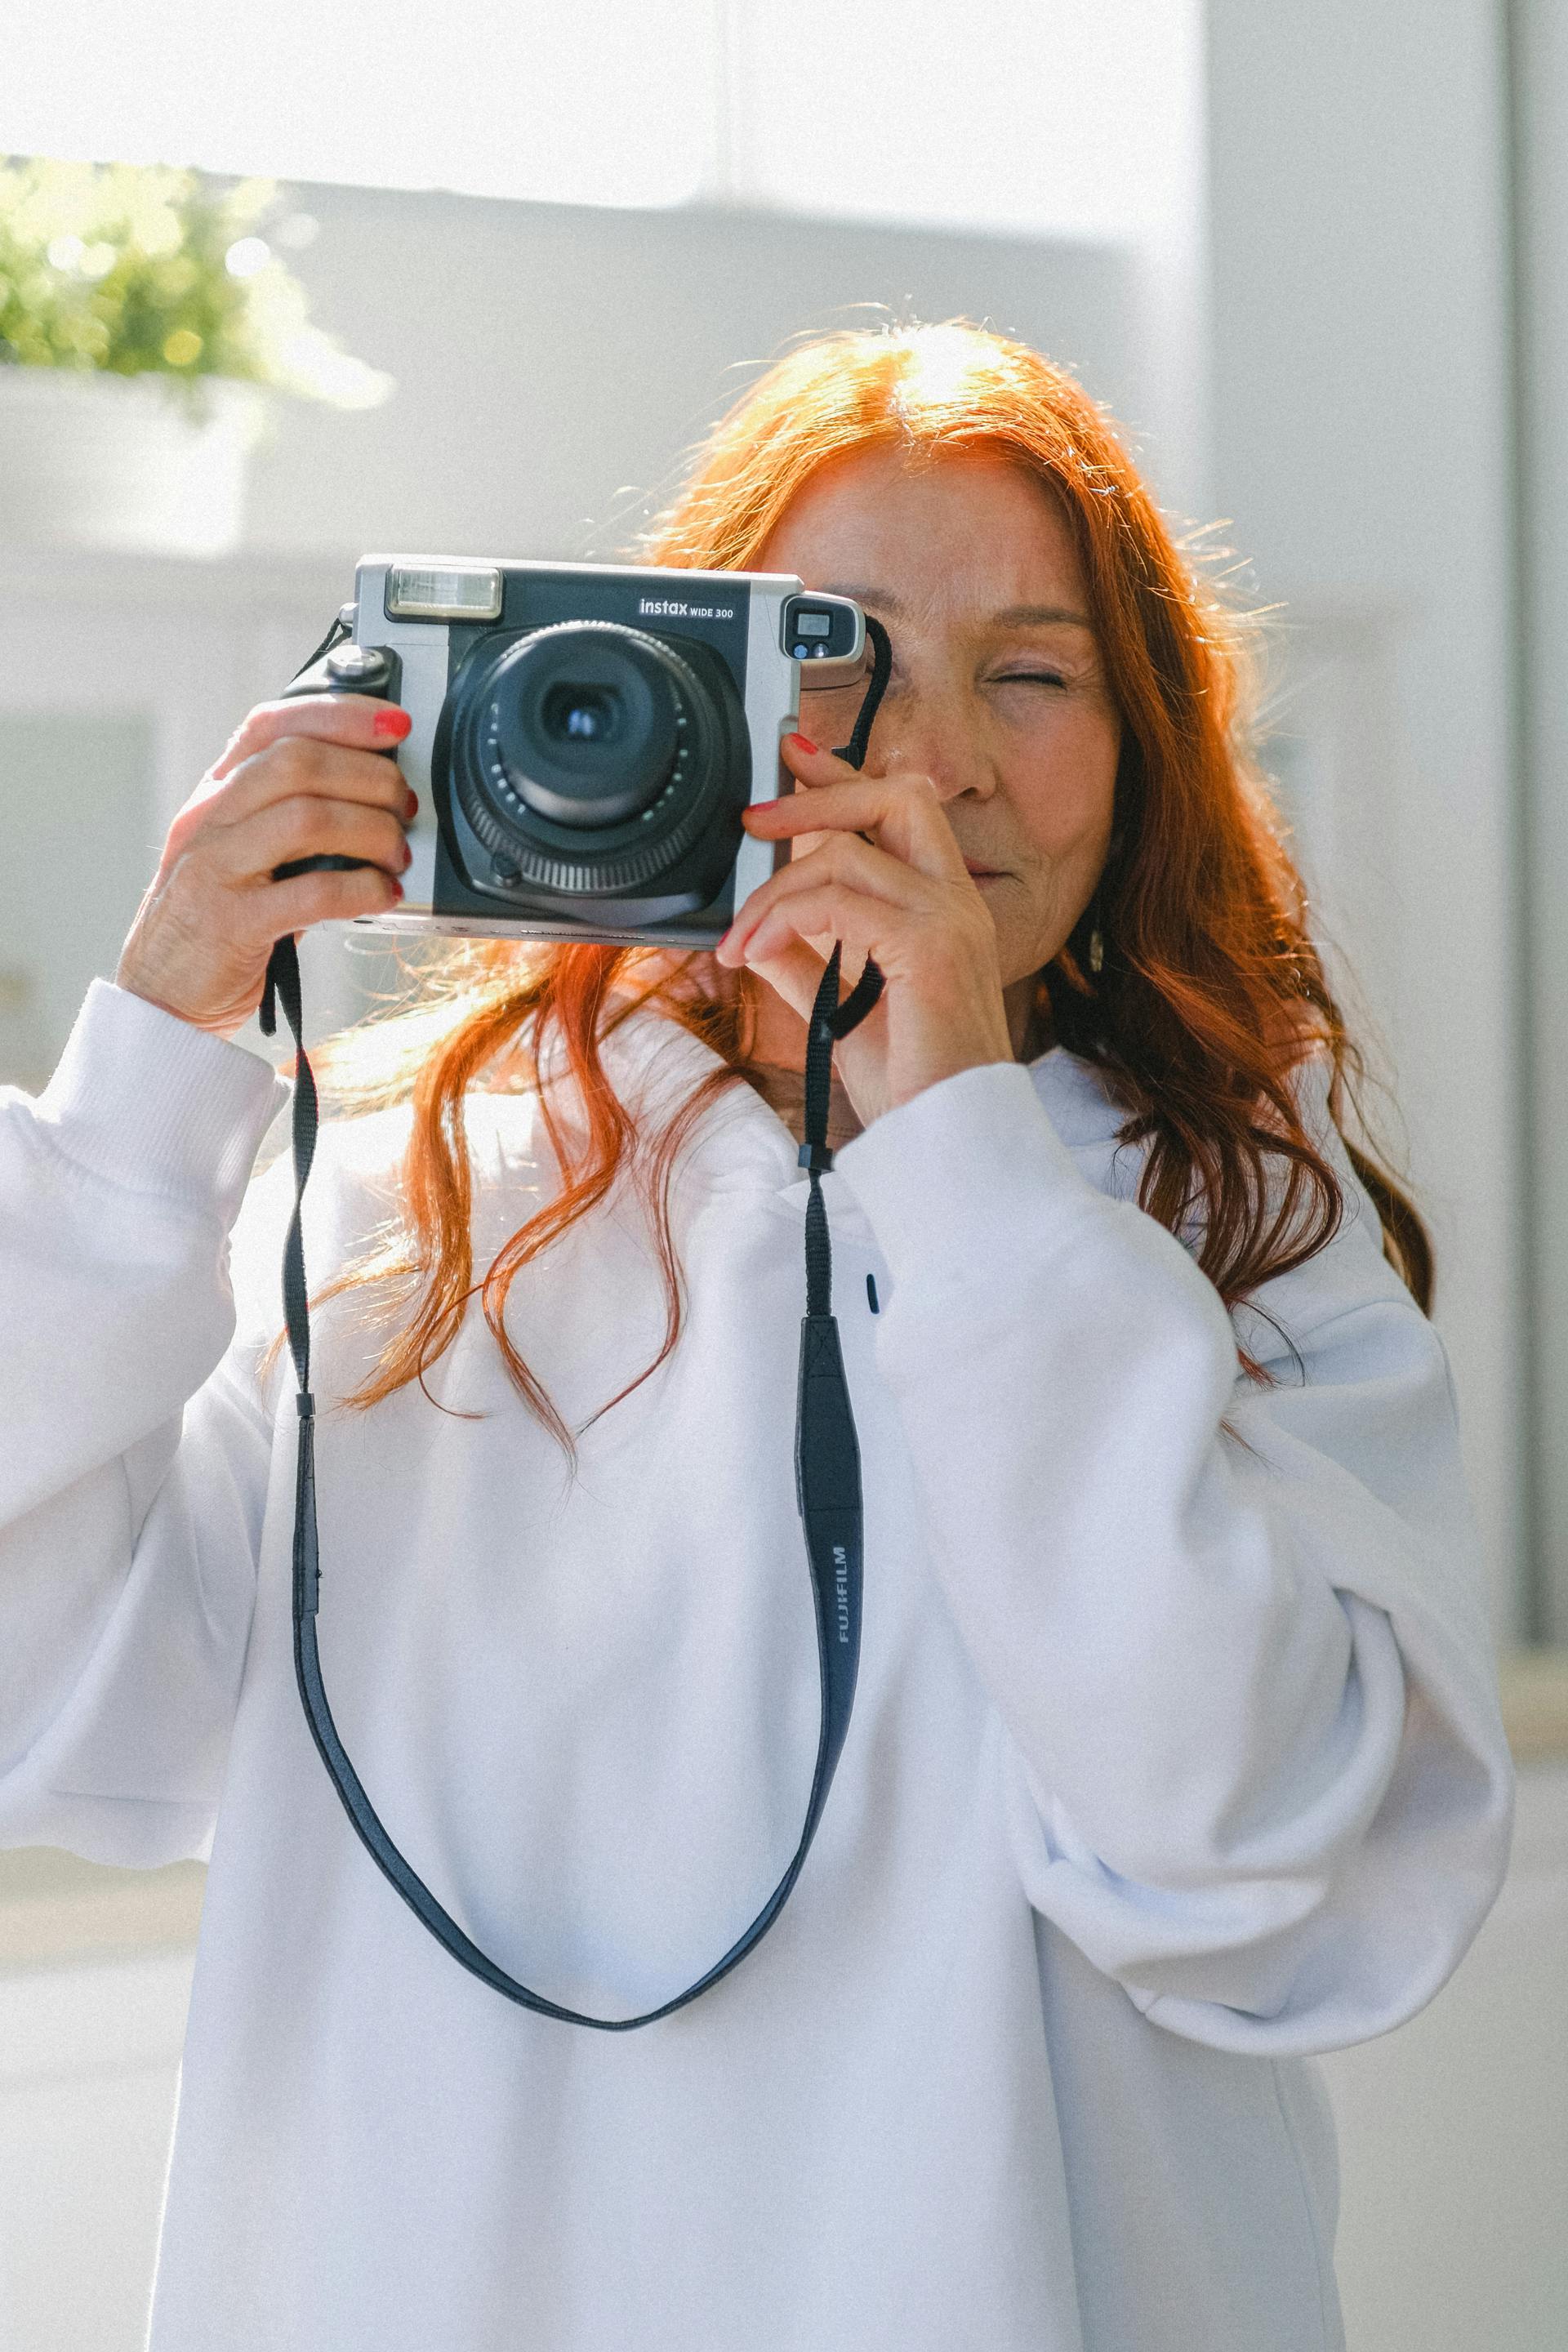 A senior red-haired woman with vintage camera | Source: Pexels